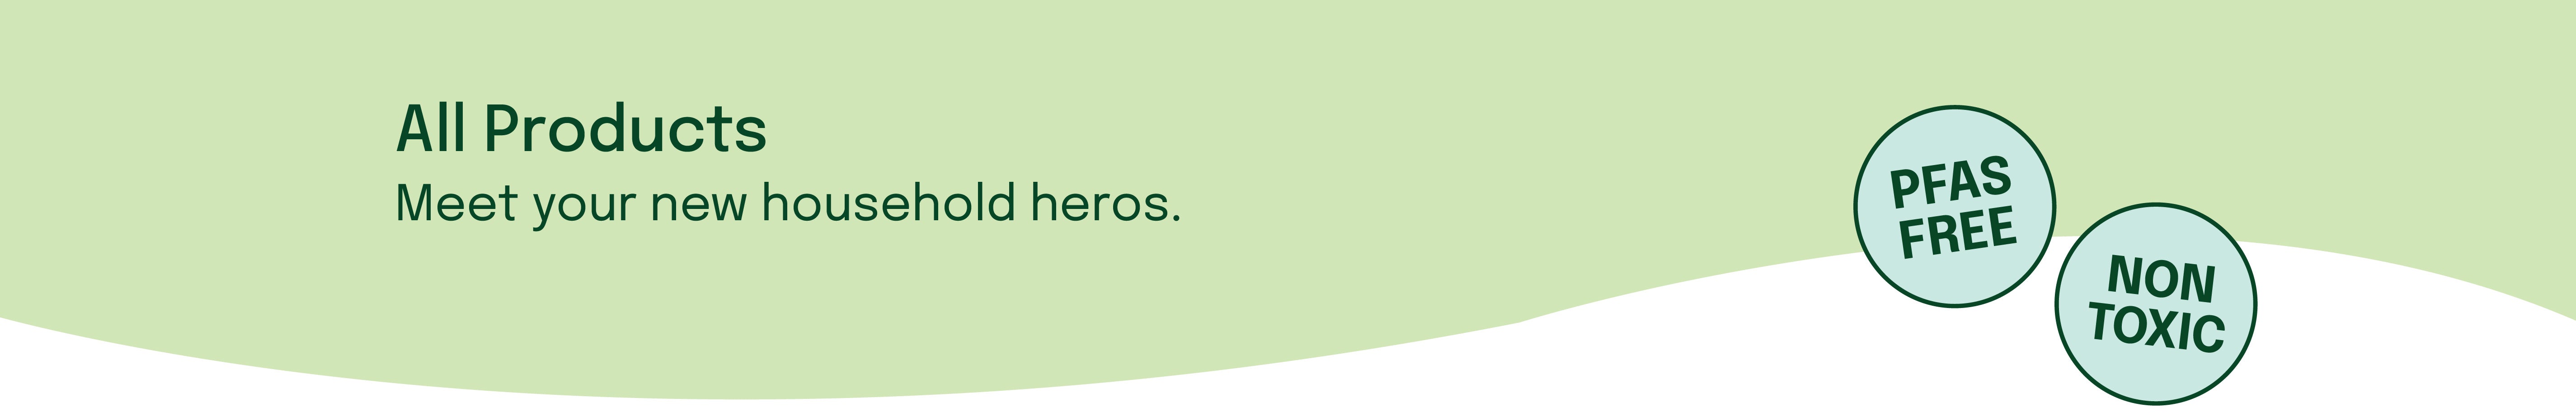 Page Banner: All Products Meet your new household heros, PFAS-free and Non-Toxic